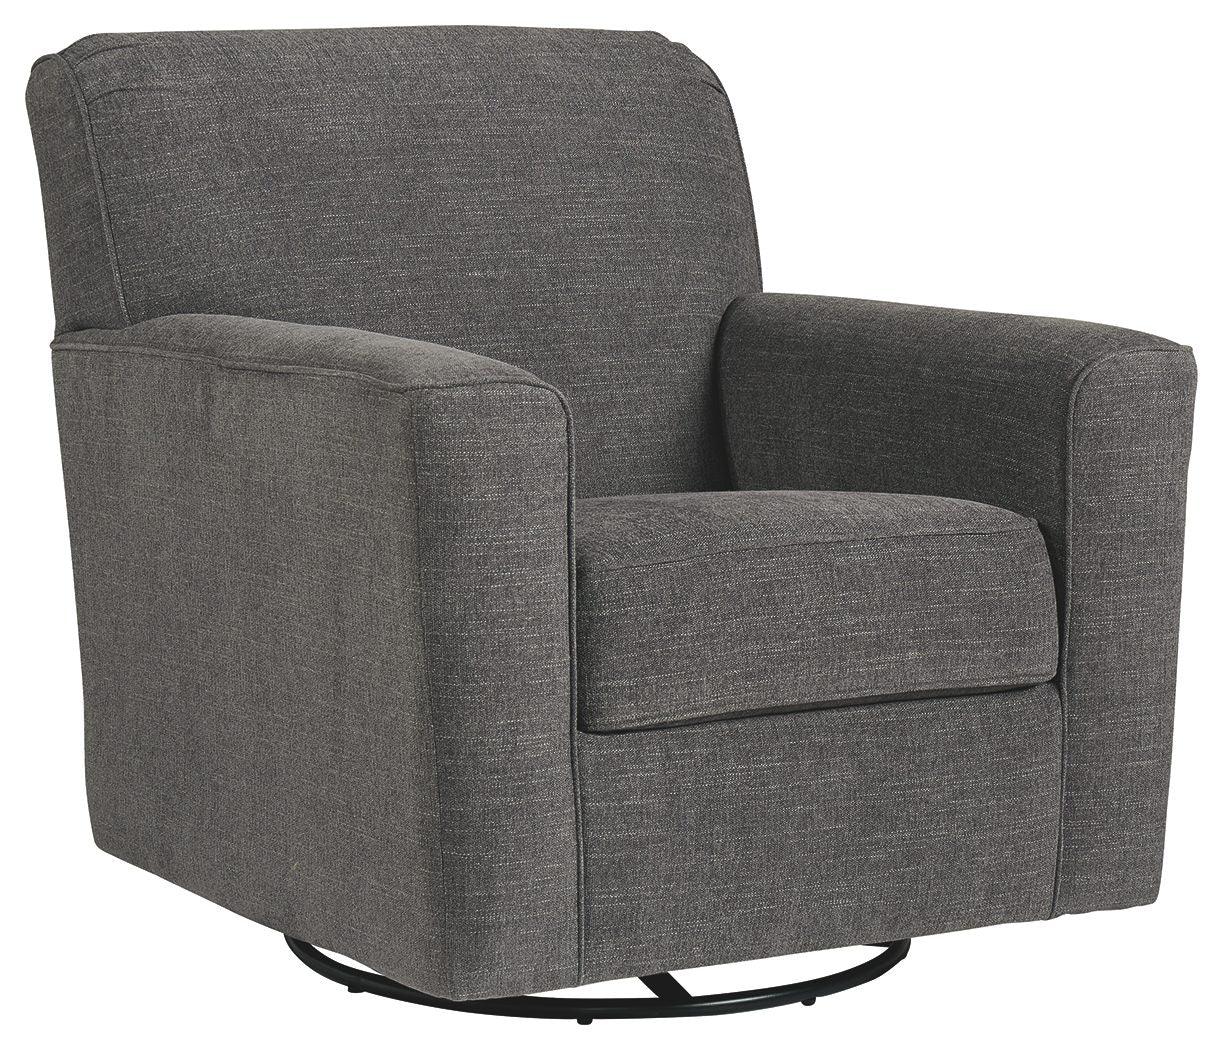 Alcona - Charcoal - Swivel Glider Accent Chair Tony's Home Furnishings Furniture. Beds. Dressers. Sofas.